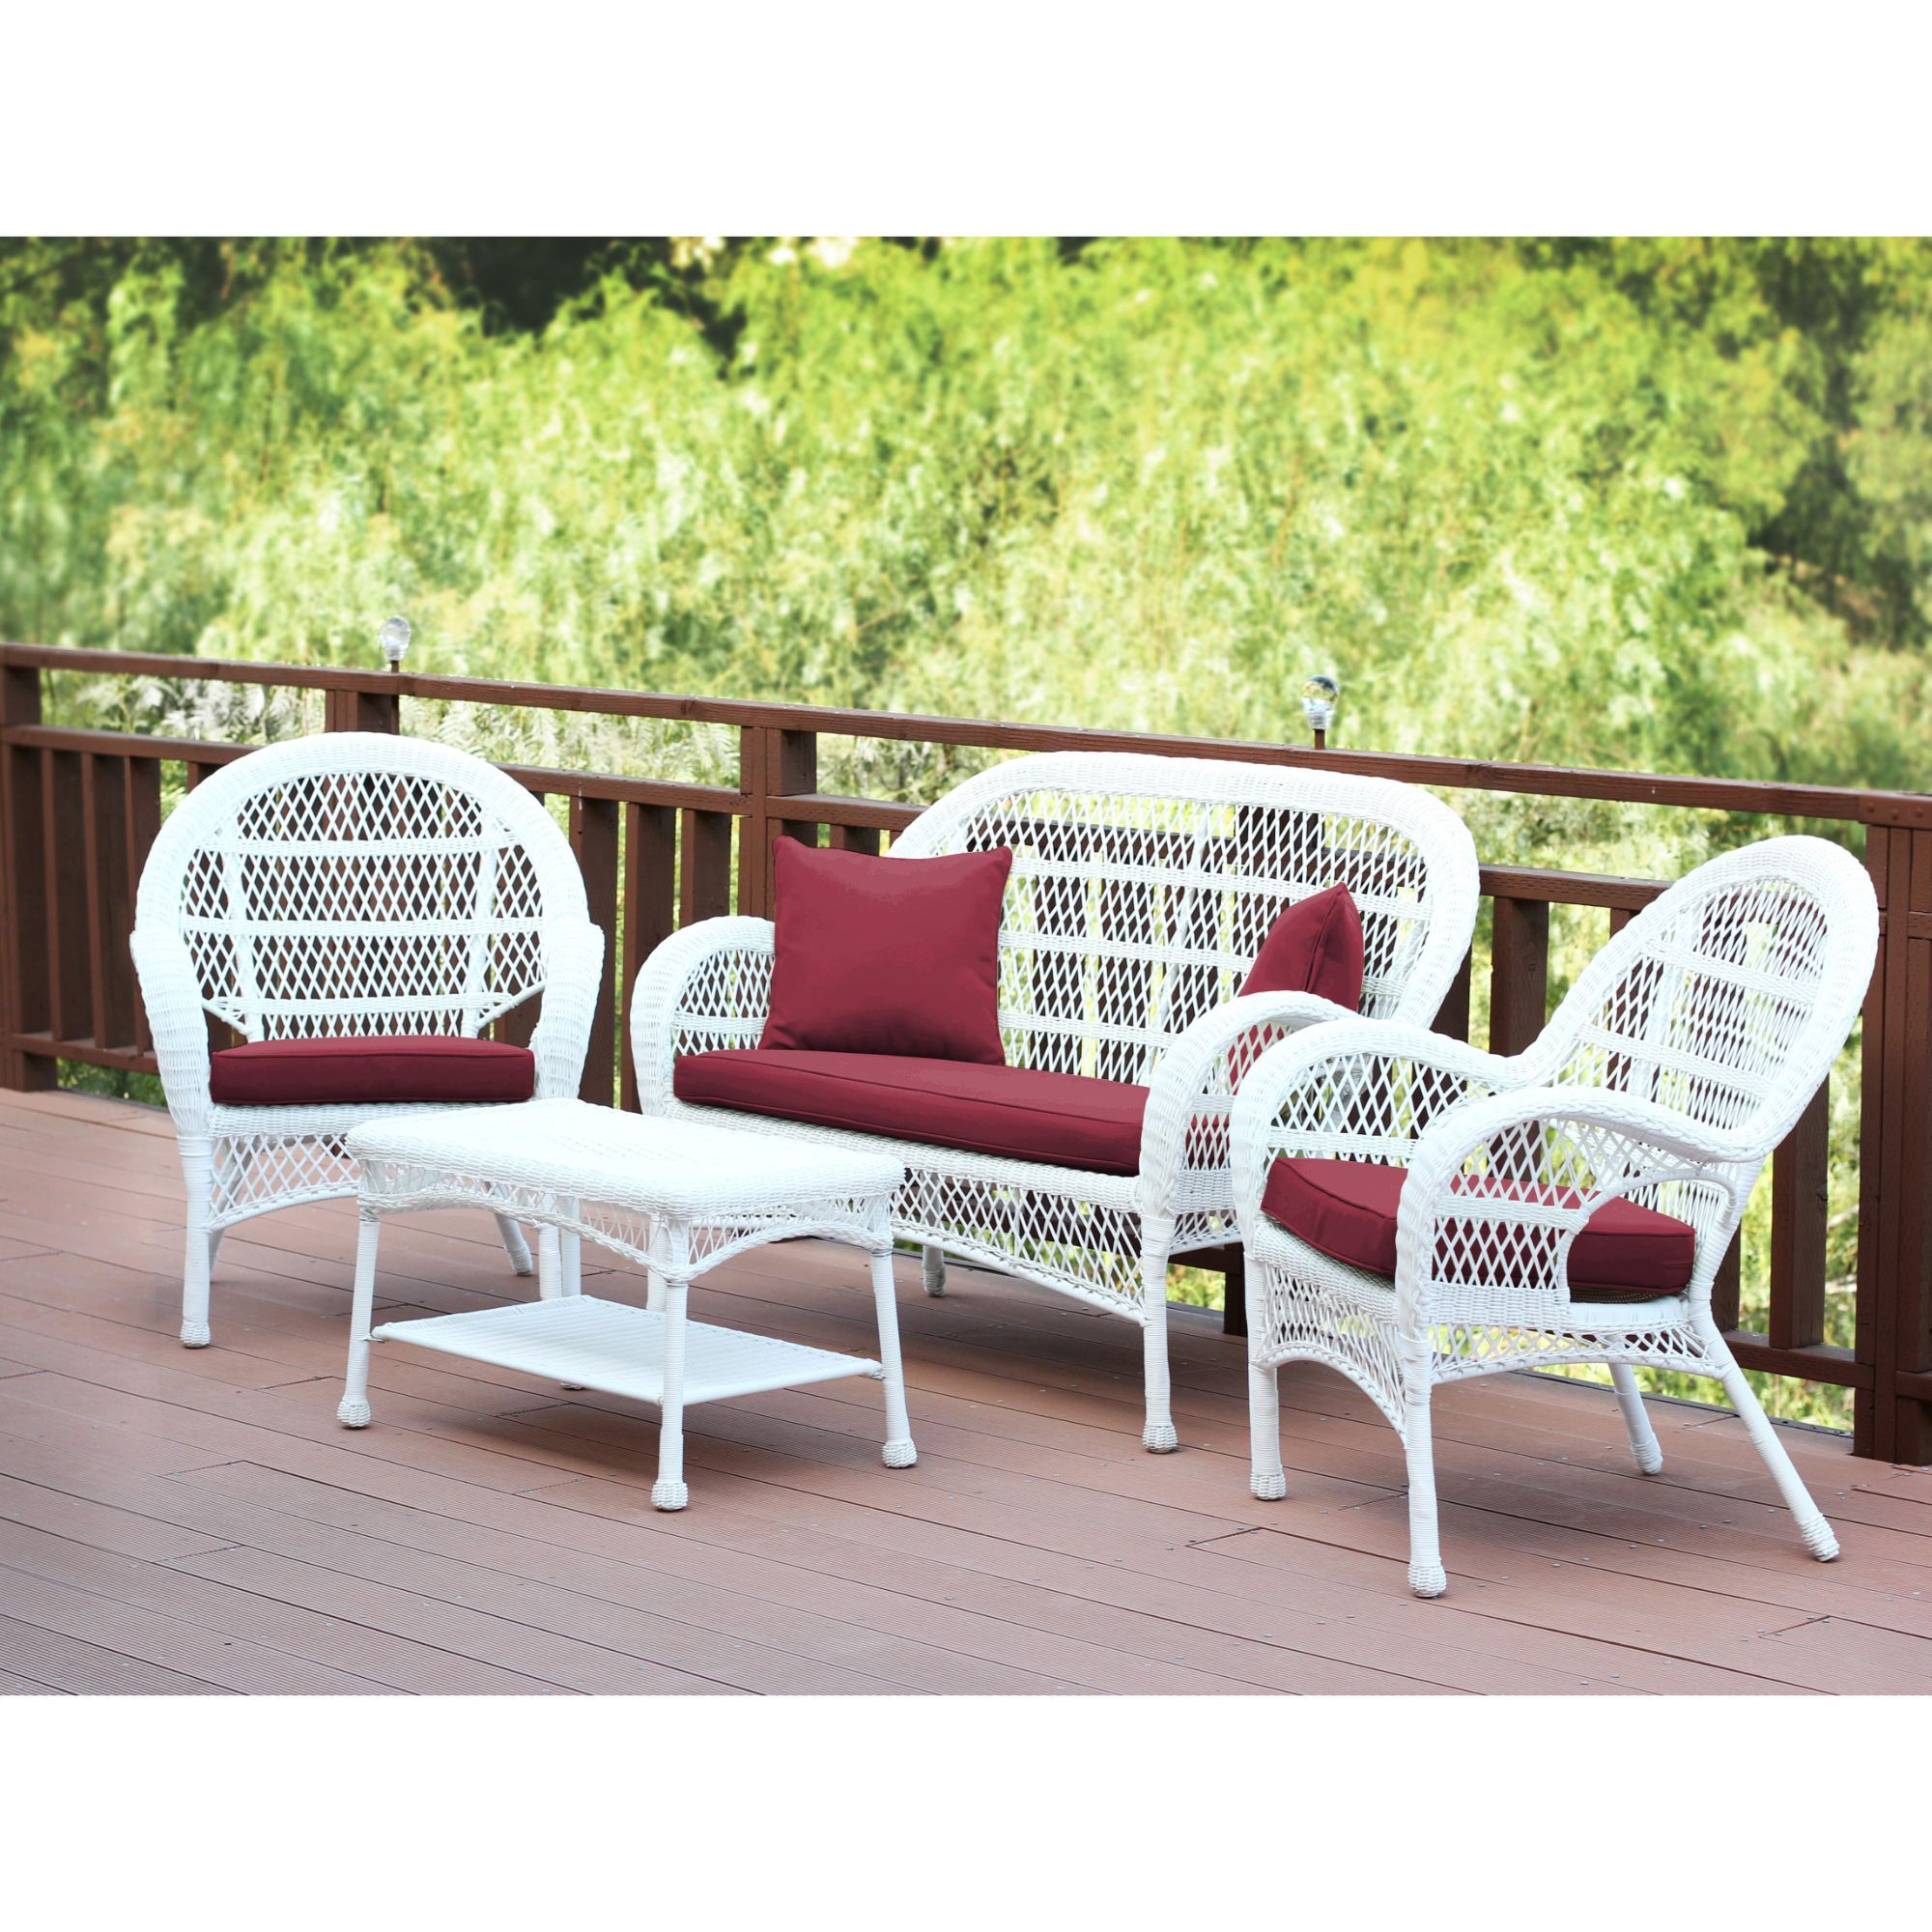 4 Piece White Wicker Outdoor Furniture Patio Conversation Set – Red Inside 4 Piece Outdoor Sectional Patio Sets (View 14 of 15)